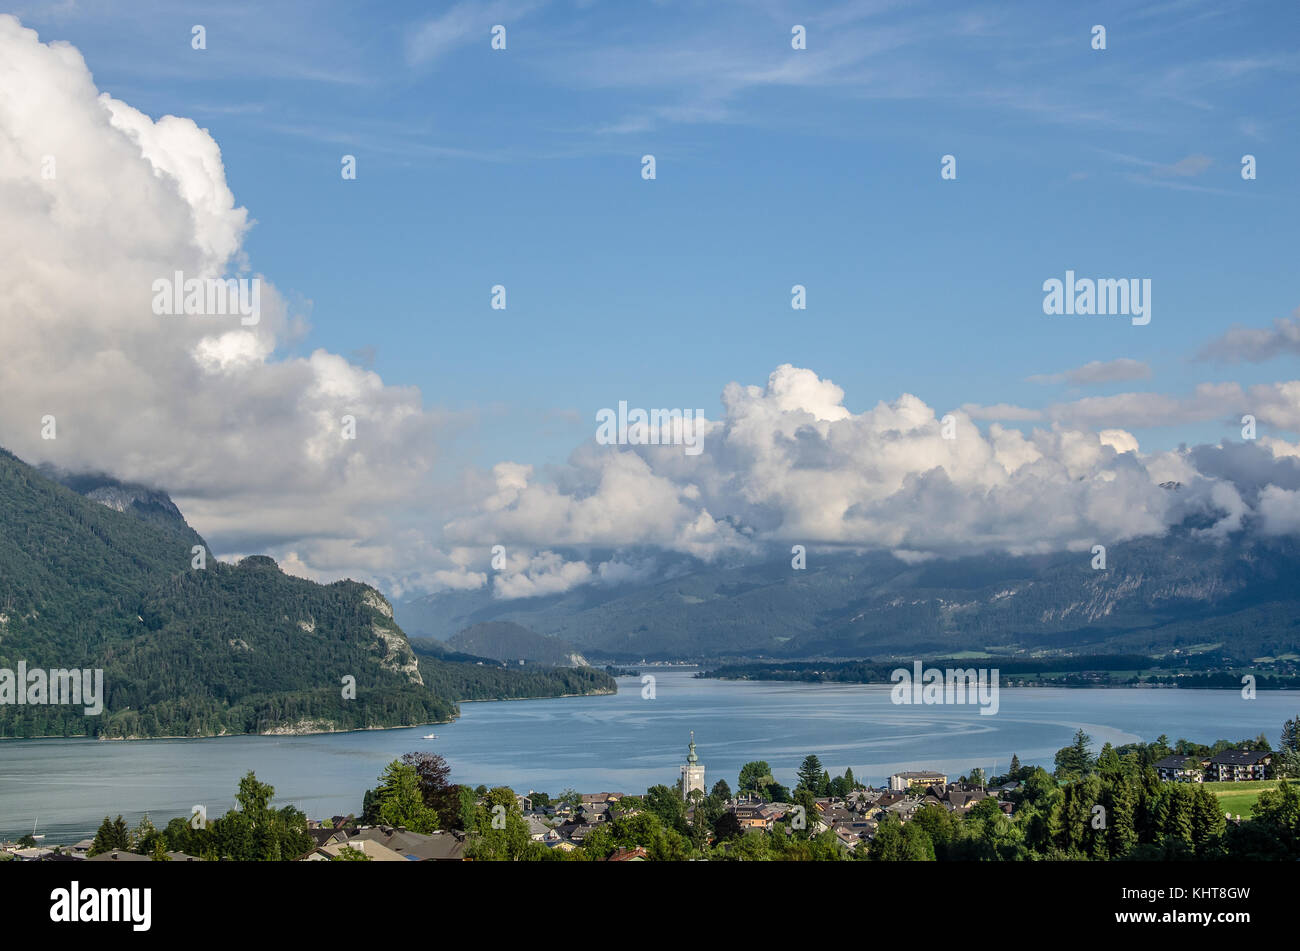 Lake Wolfgang (German: Wolfgangsee) lies mostly within the state of Salzburg and is one of the best known lakes in the Salzkammergut resort region. Stock Photo